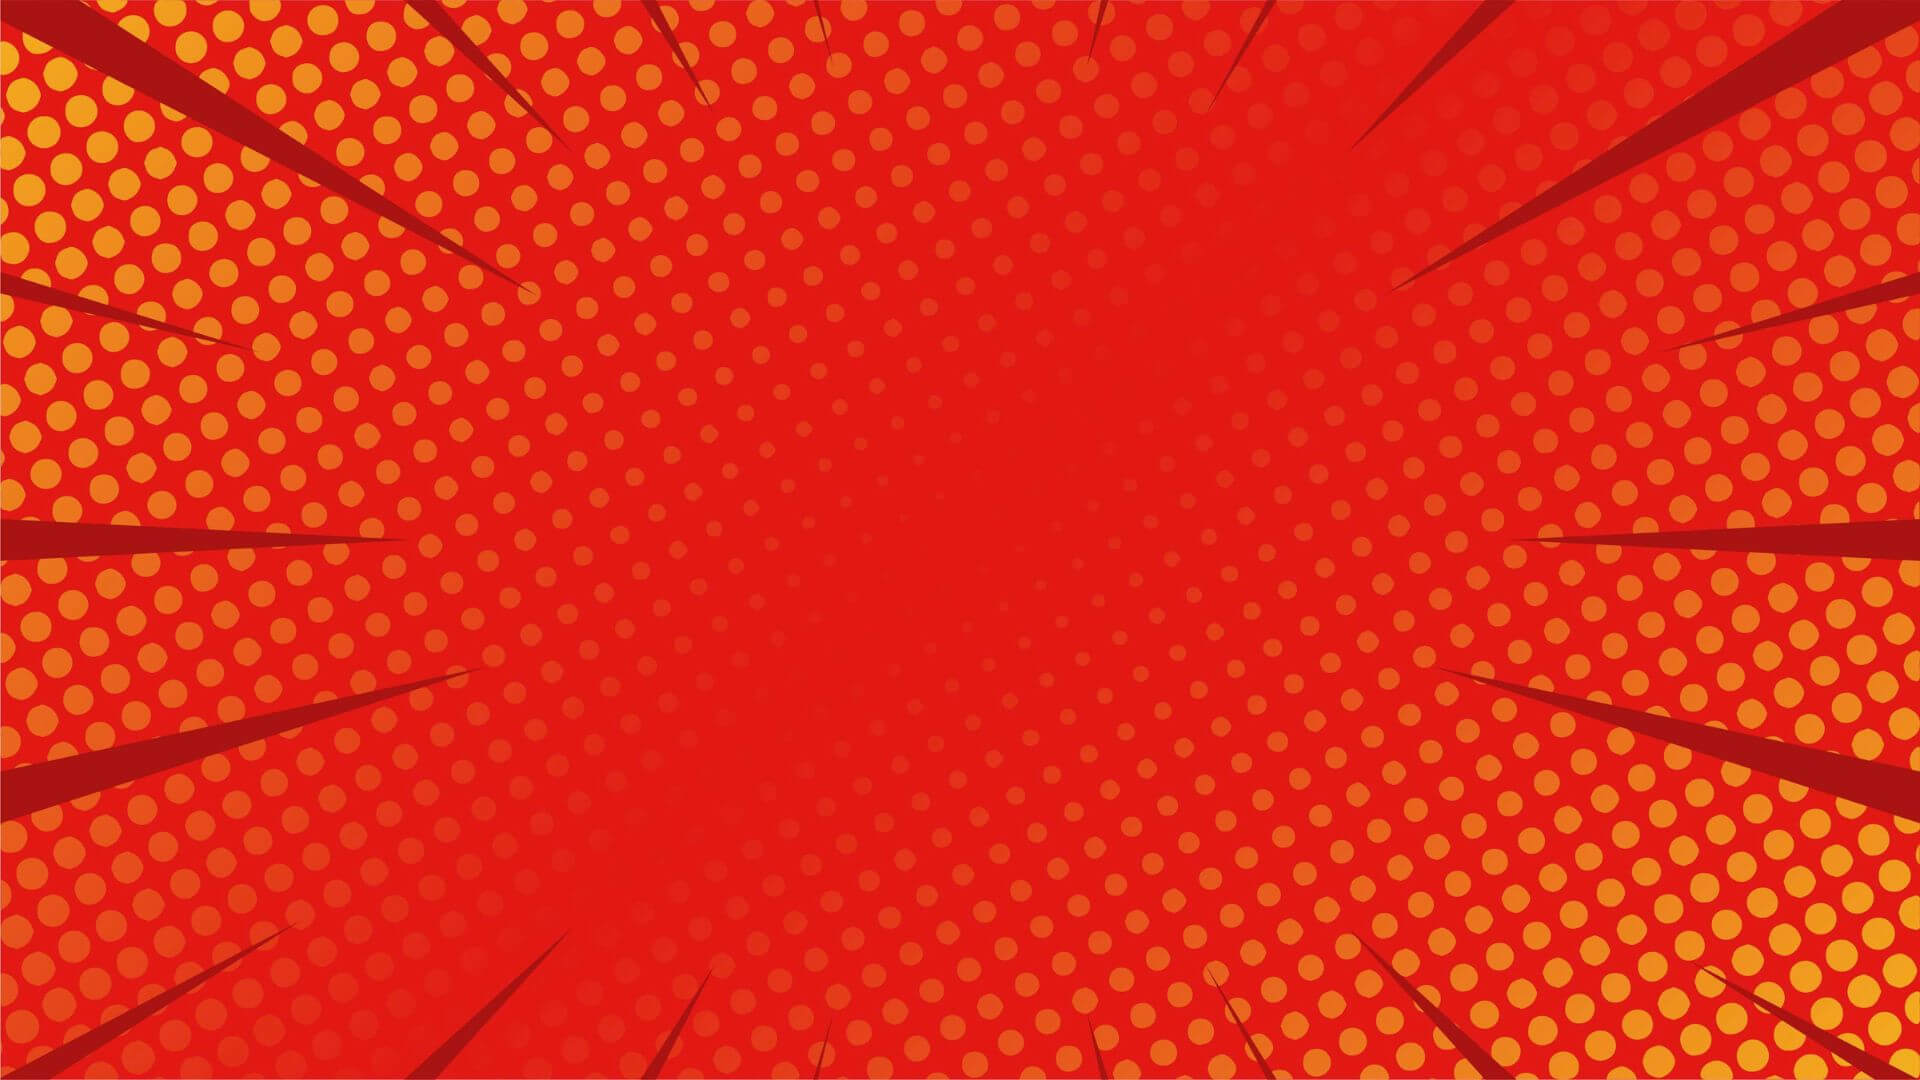 Bright red and gold vintage comic background